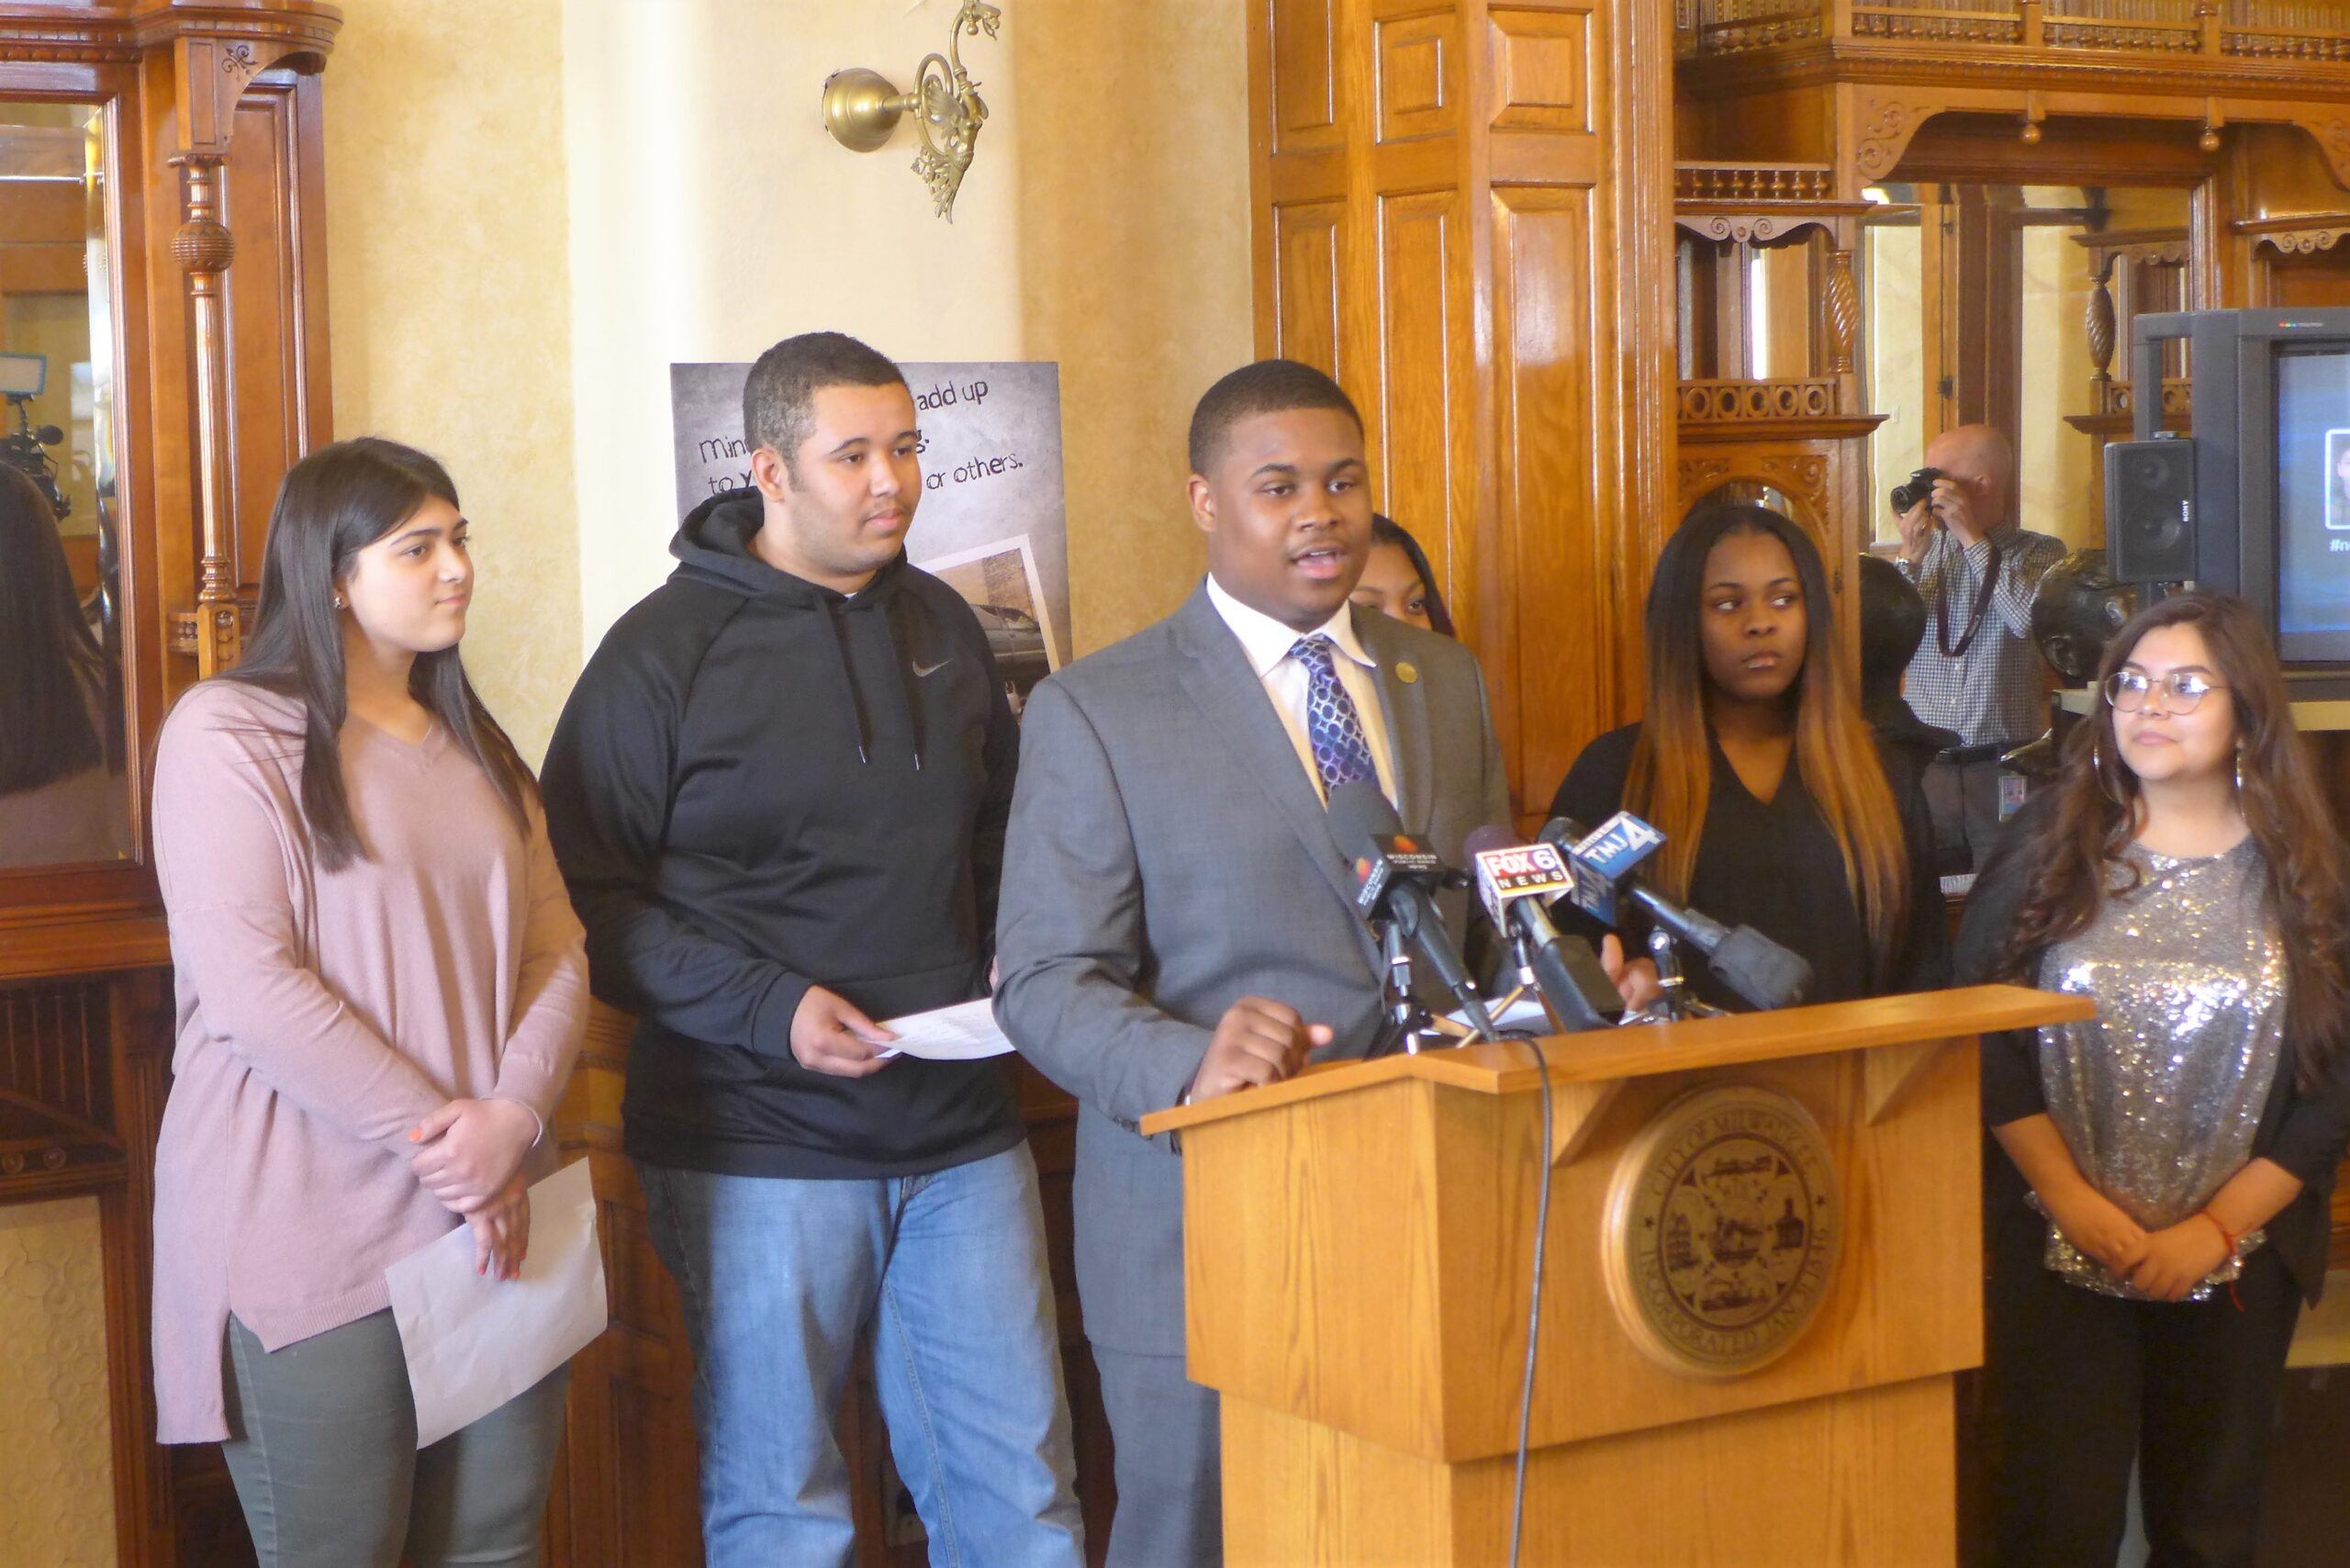 Milwaukee Youth Council President Kalan Haywood, II introduces the No Free Rides Campaign aimed at reducing youth involved carjackings